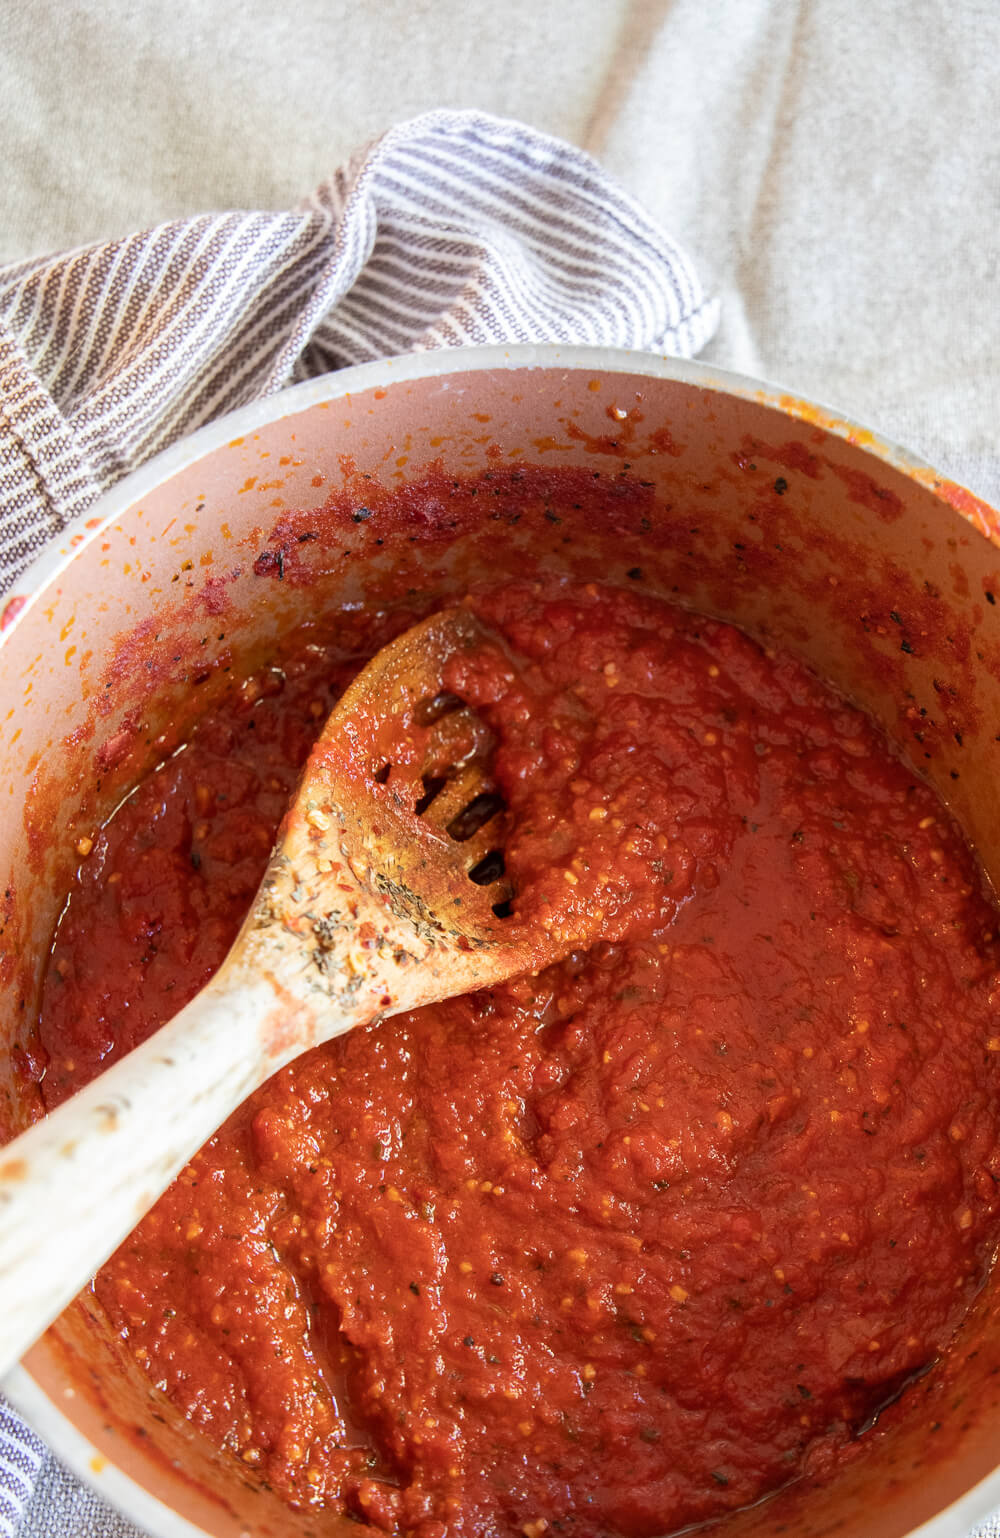 How to make foolproof easy homemade pizza sauce to use anytime you want to make homemade pizzas or need a great sauce for dipping.